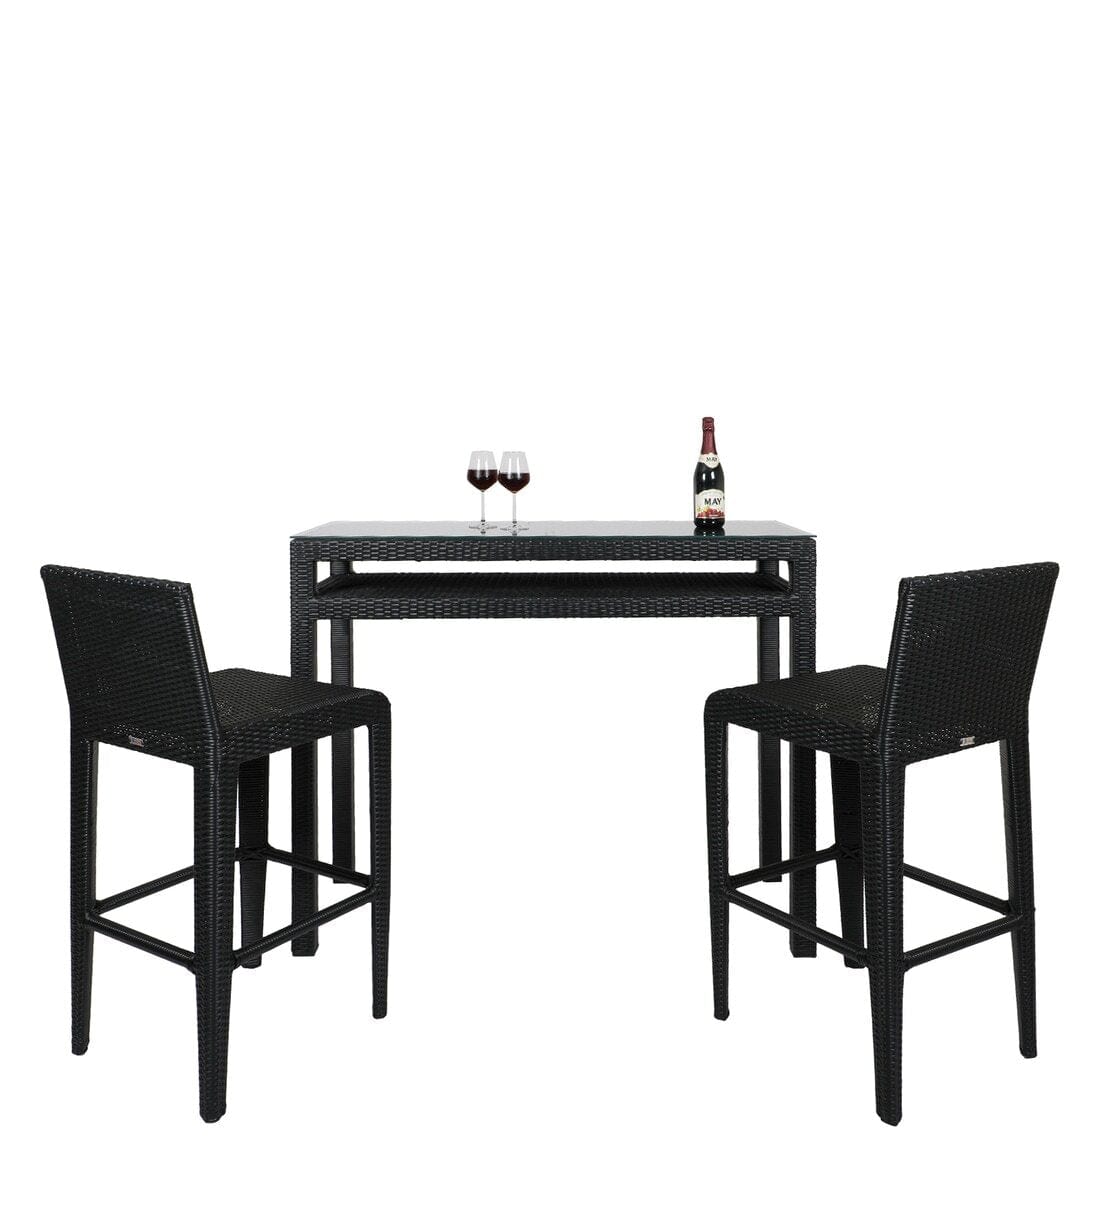 Dreamline Outdoor Bar Sets/Garden Patio Bar Sets - 2 Chairs And Table Set (Black)